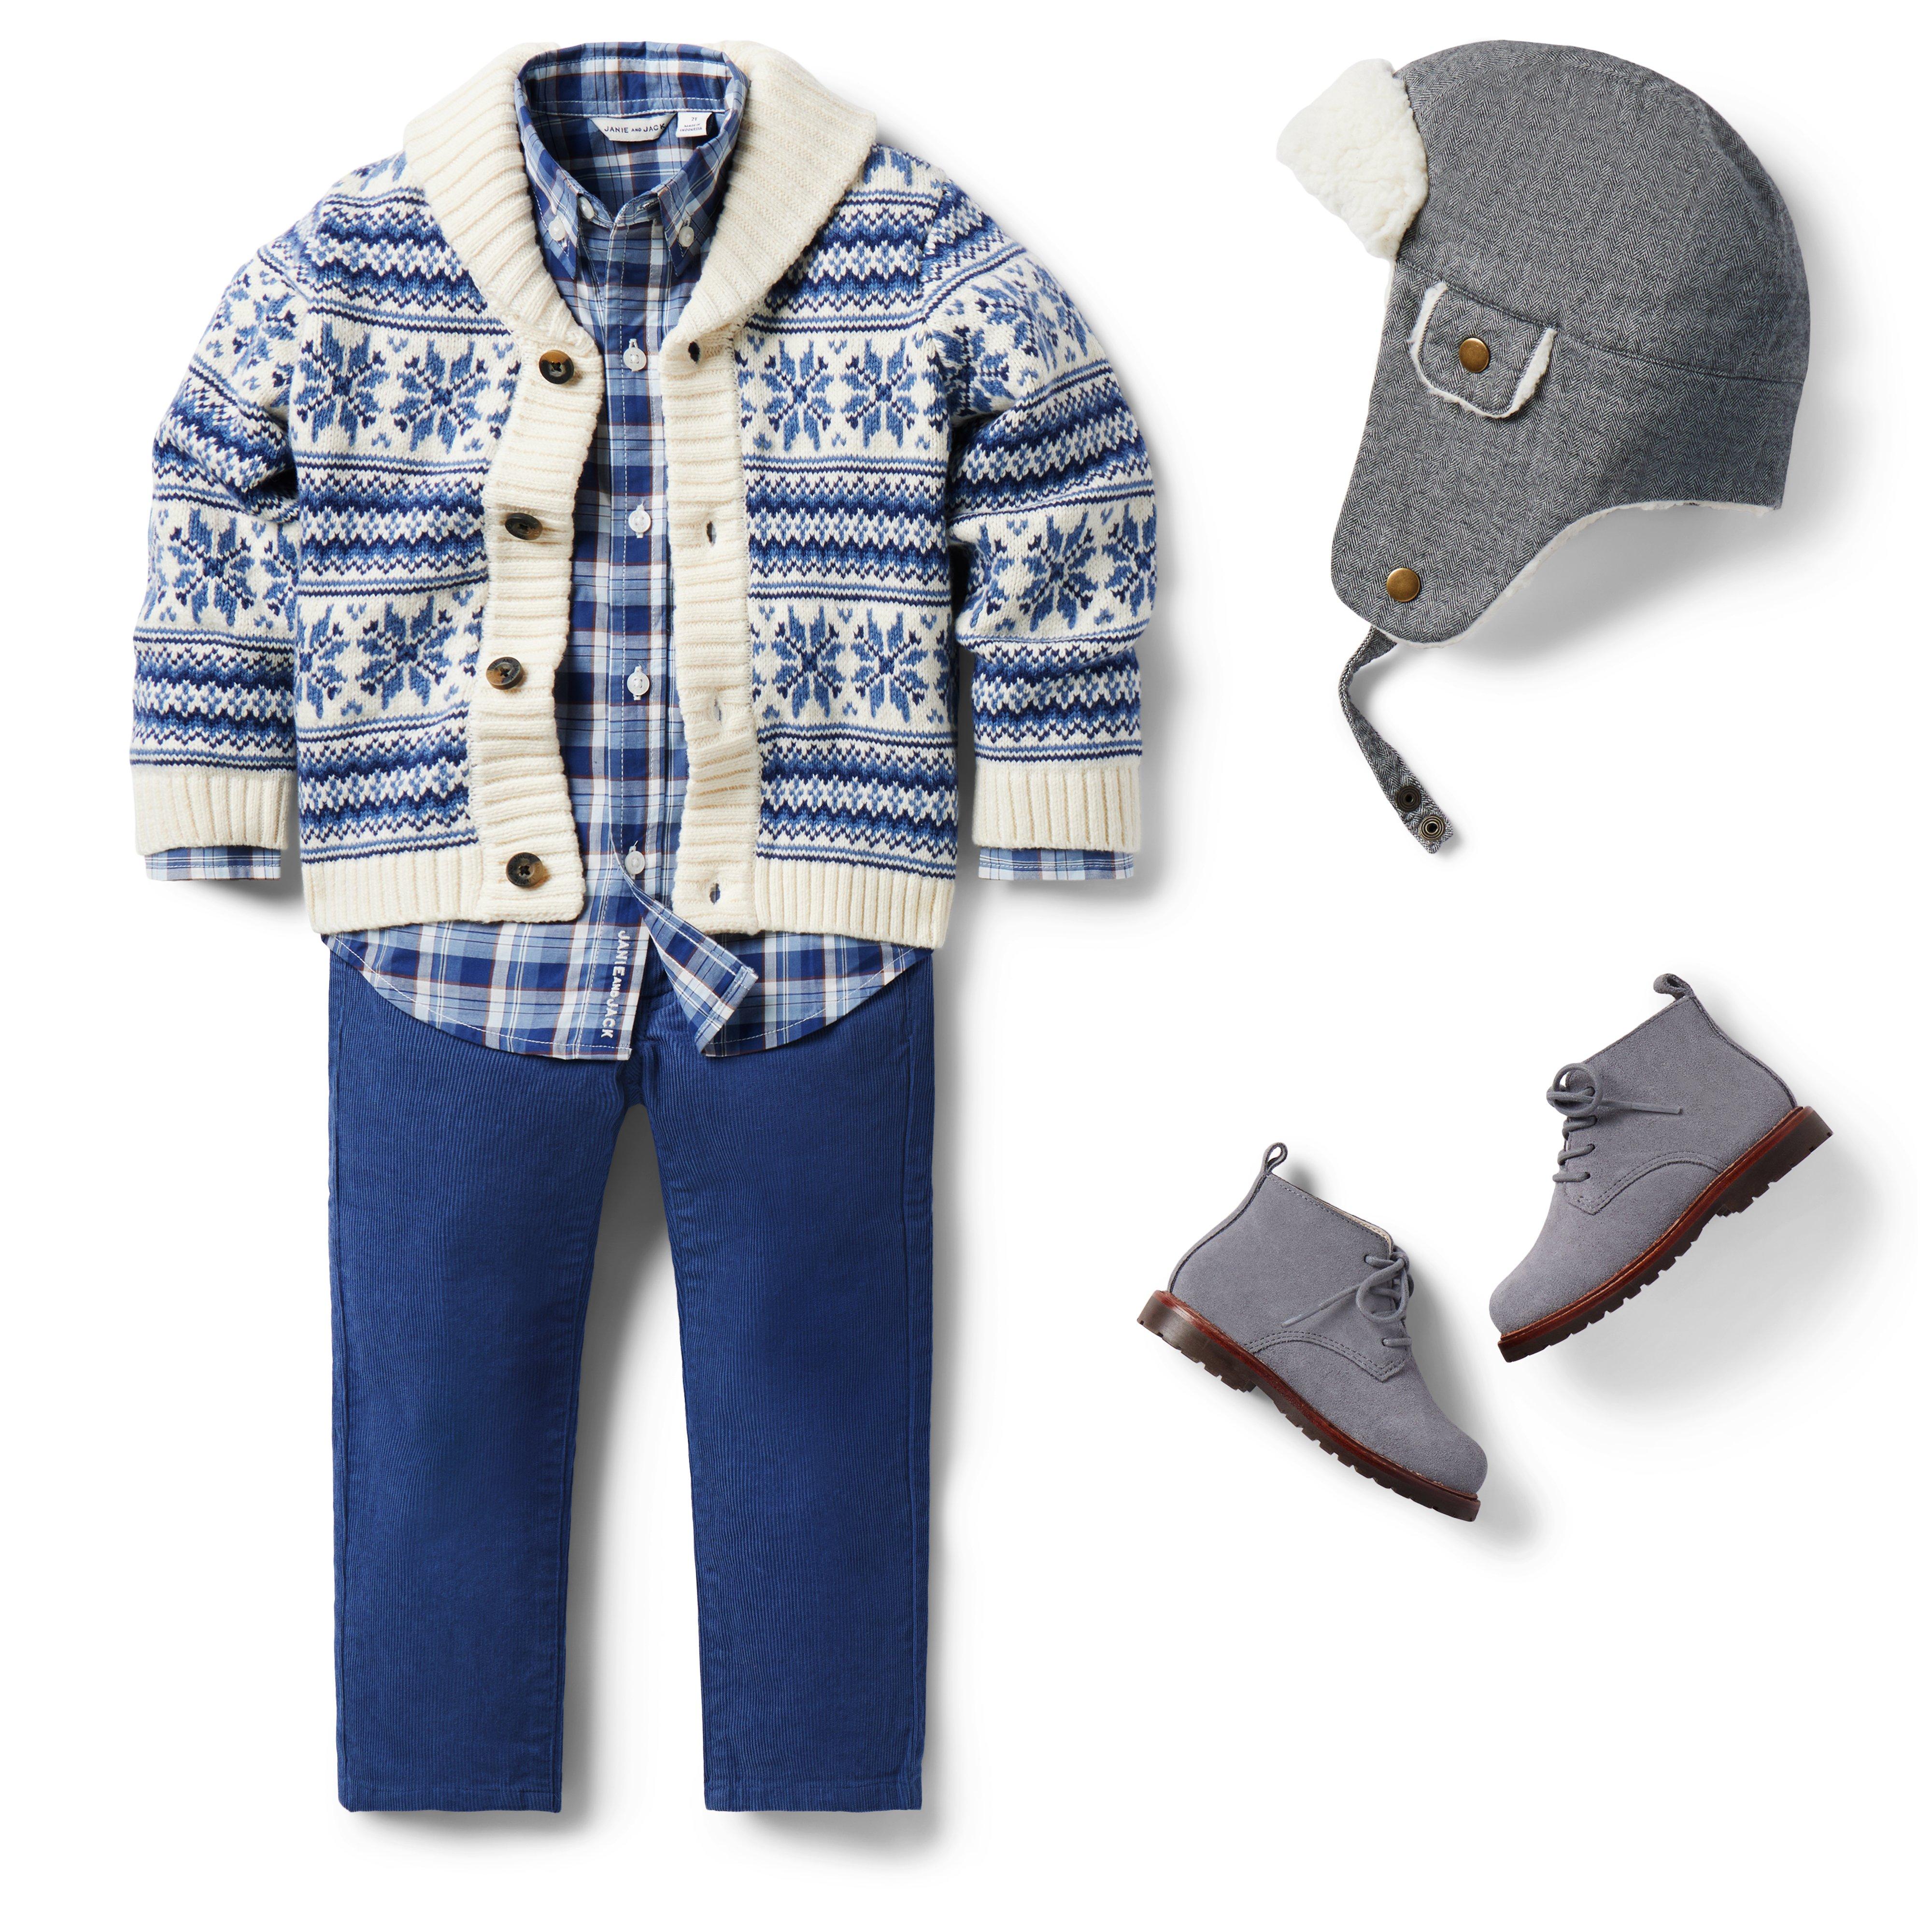 Boy Shop The Look Outfit by Janie and Jack